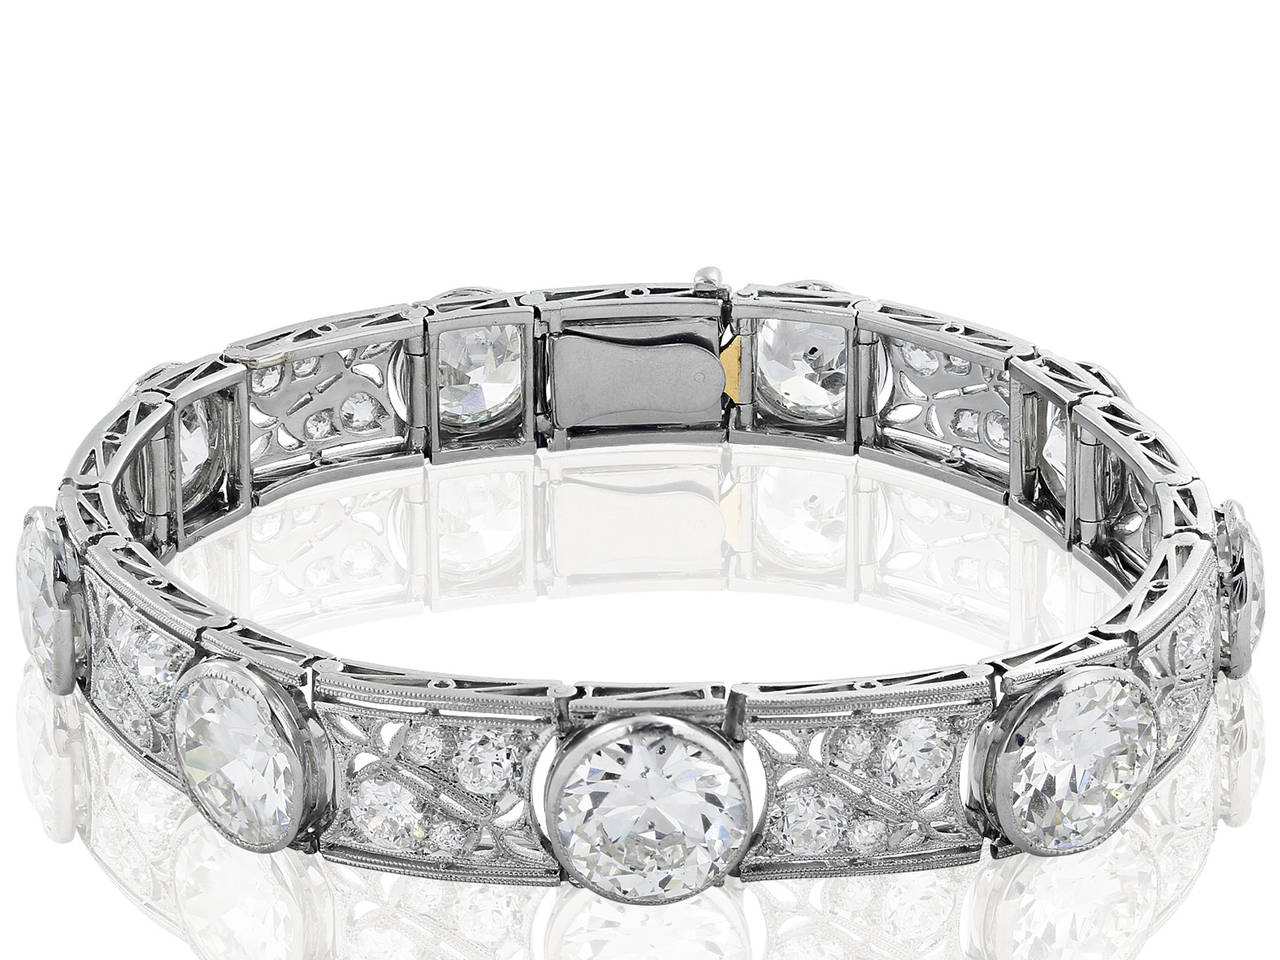 Platinum Edwardian bracelet consisting of 9 Old European cut diamonds with 36 diamonds set in open work design weighing 28.50 carats with a color and clarity of H/I SI1 respectively.